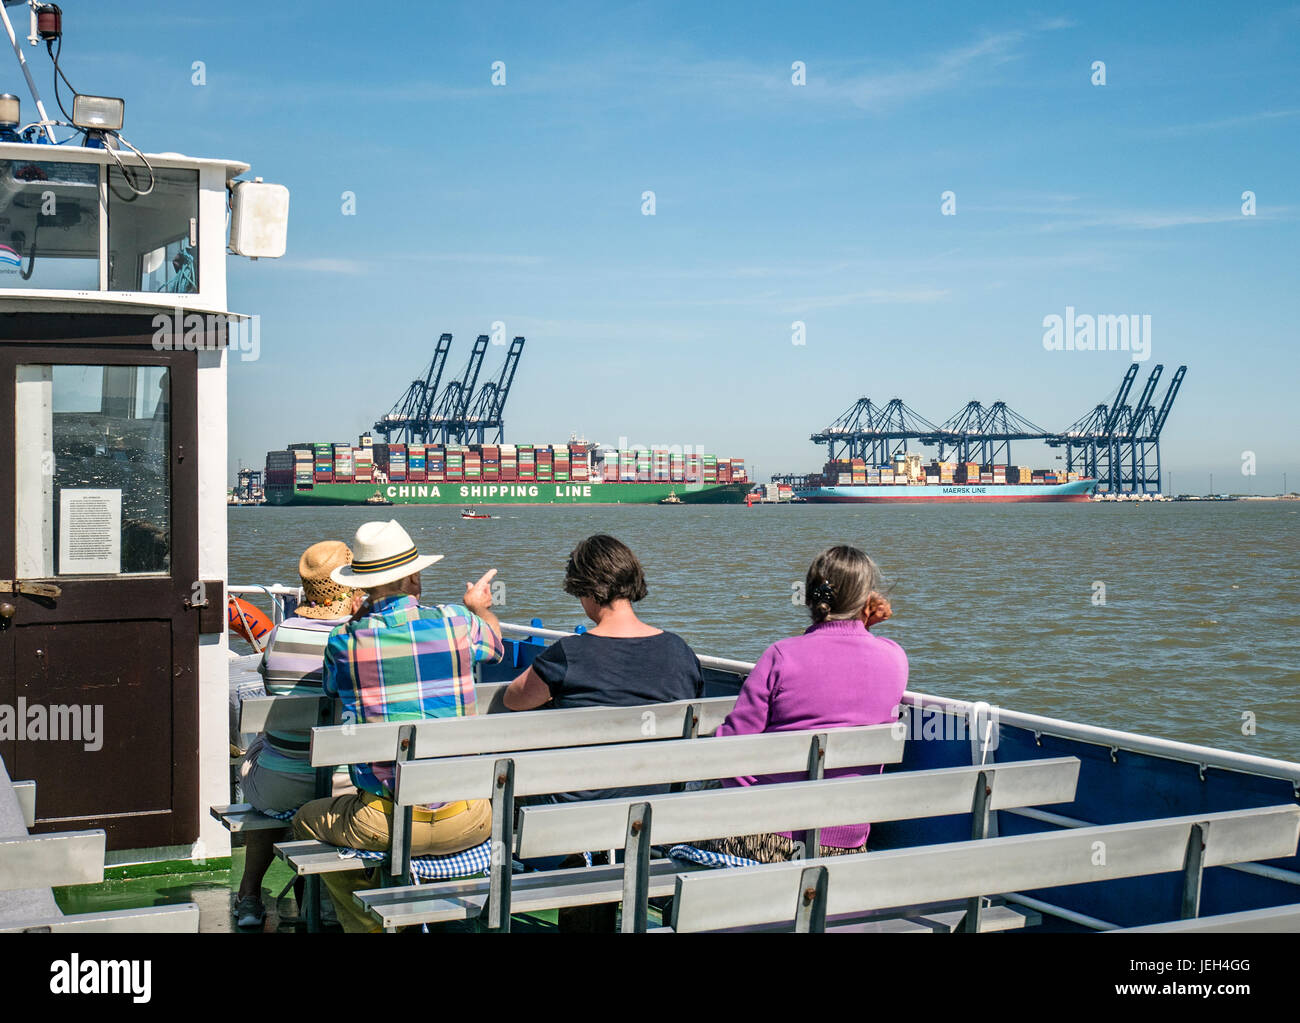 Tourists on River Orwell Cruise viewing Container Ships in the Port of Felixstowe Suffolk UK Stock Photo